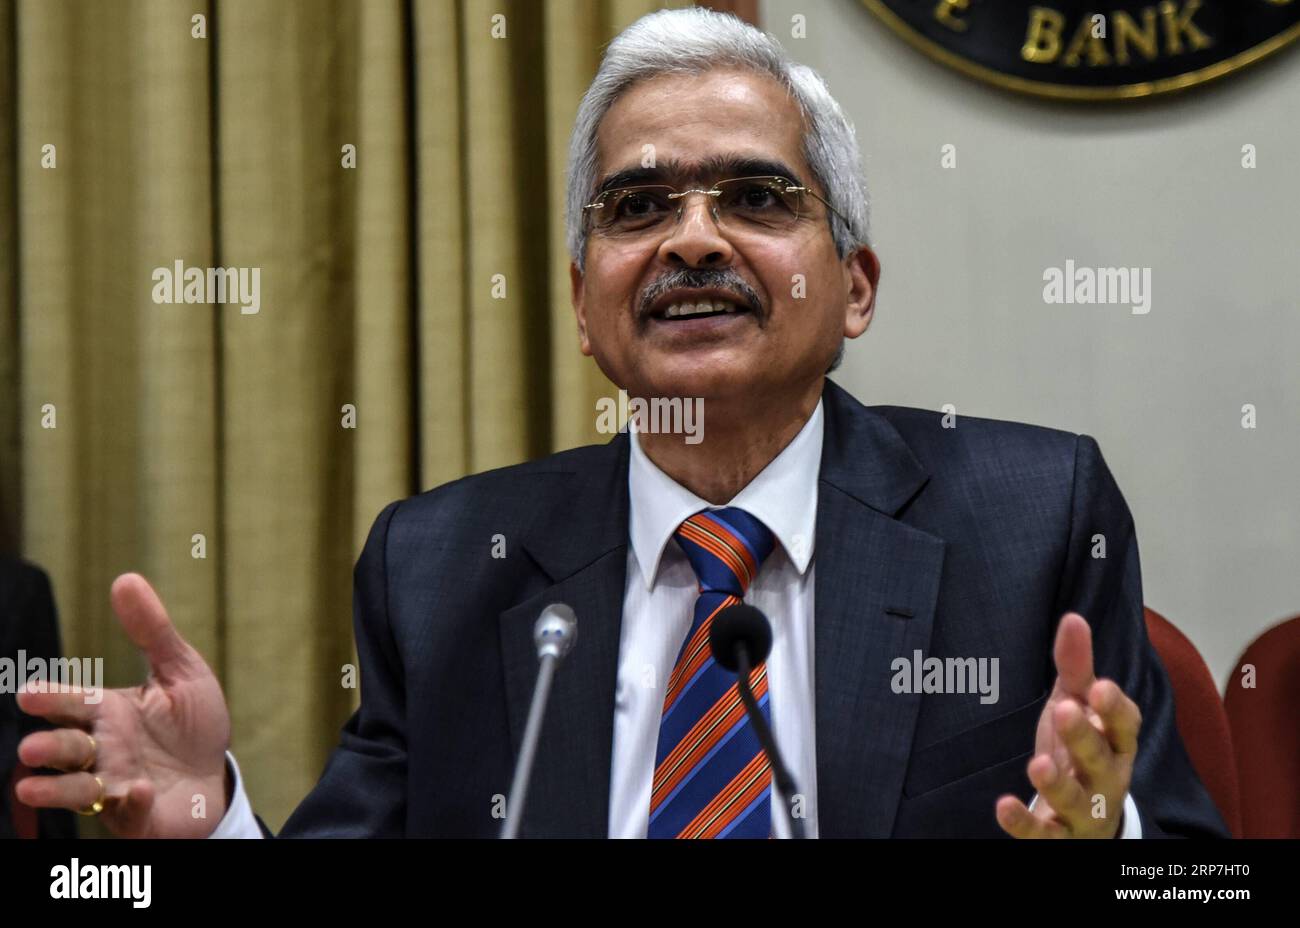 (190207) -- MUMBAI, Feb. 7, 2019 (Xinhua) -- The Reserve Bank of India (RBI) Governor Shaktikanta Das attends a news conference after a monetary policy review in Mumbai, India, Feb. 7, 2019. India s central bank - the Reserve Bank of India (RBI) on Thursday reduced the repo rate, or the interest rate at which it lends money to banks, by a marginal 25 basis points. The new repo rate now stands at 6.25 percent from the earlier 6.50 percent. (Xinhua/Stringer) INDIA-MUMBAI-RBI GOVERNOR-PRESS CONFERENCE PUBLICATIONxNOTxINxCHN Stock Photo